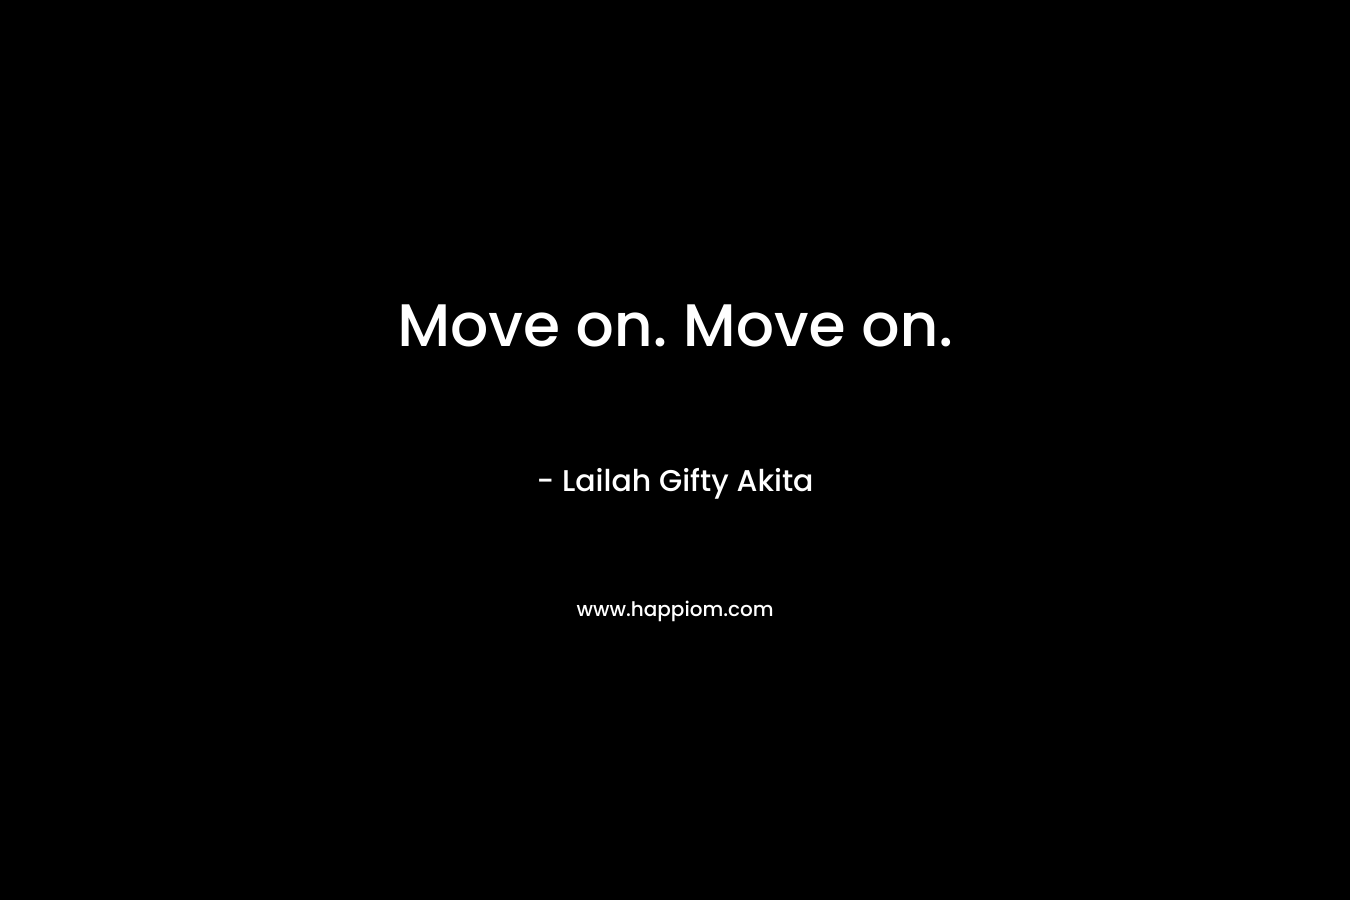 Move on. Move on.